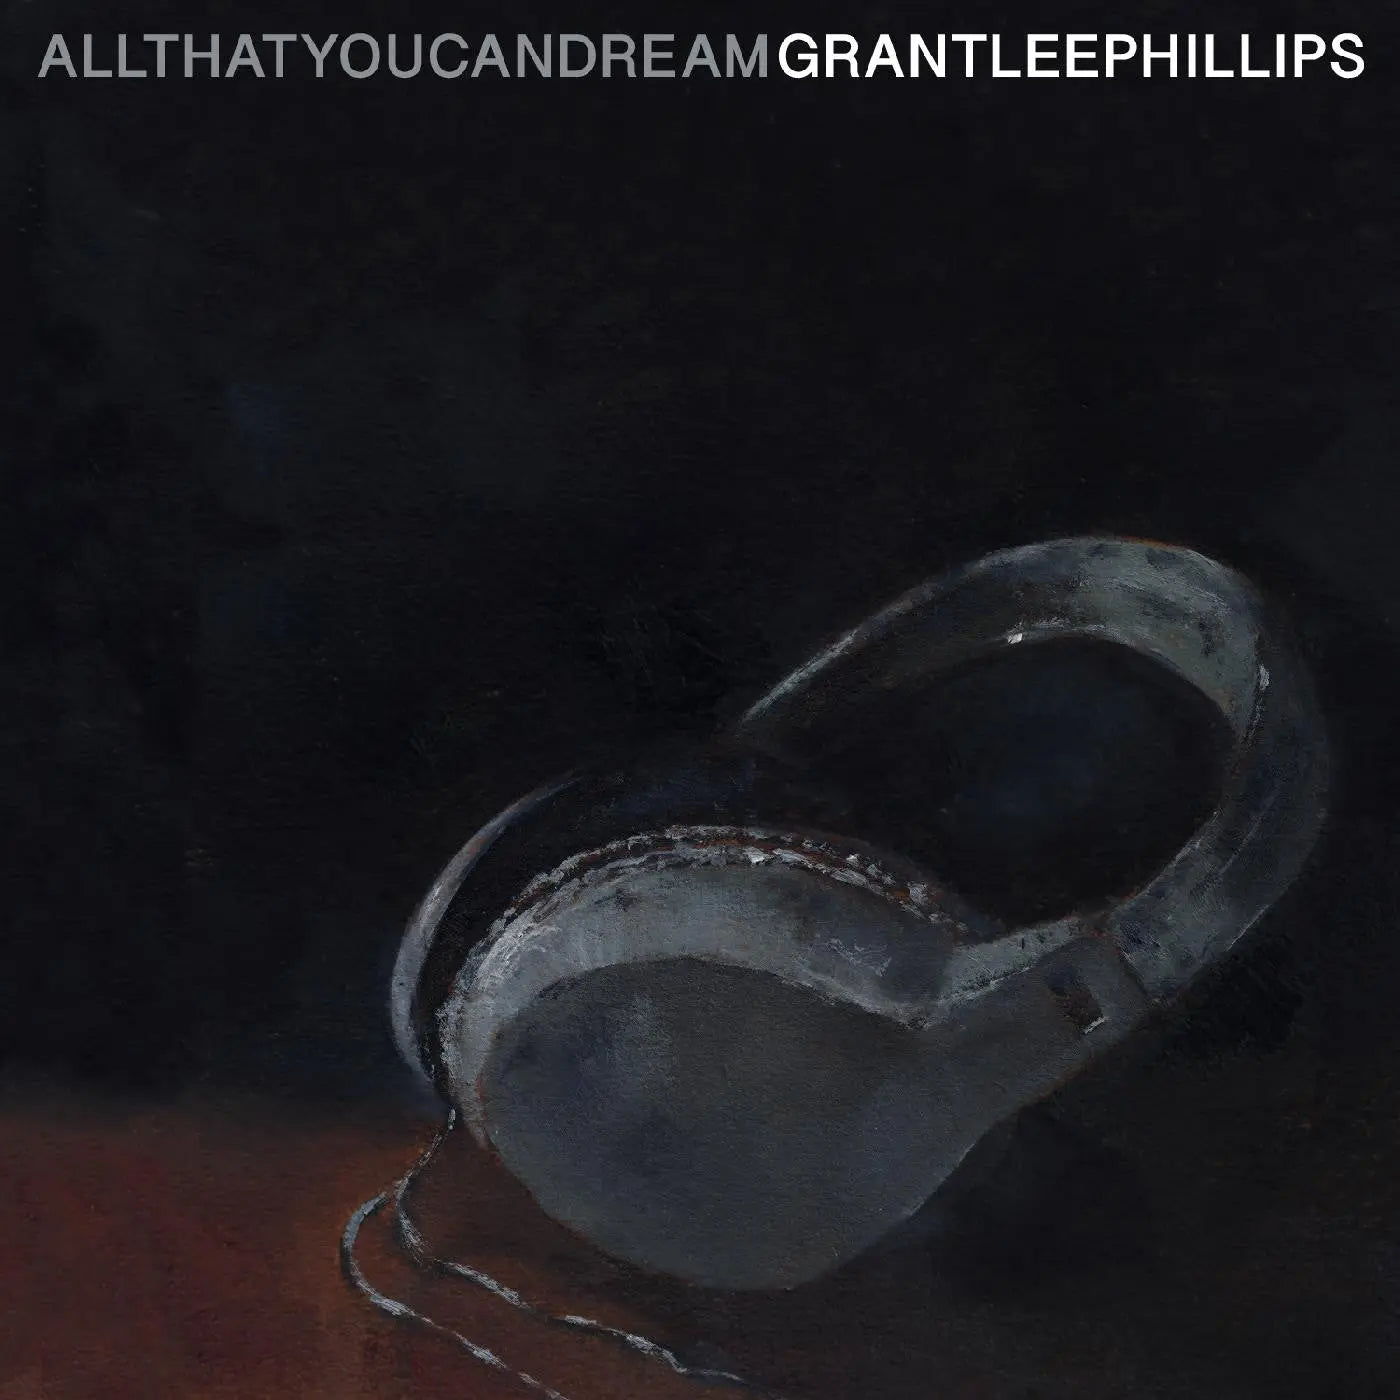 Grant-Lee Phillips - All That You Can Dream [Vinyl Indie Exclusive Autographed]